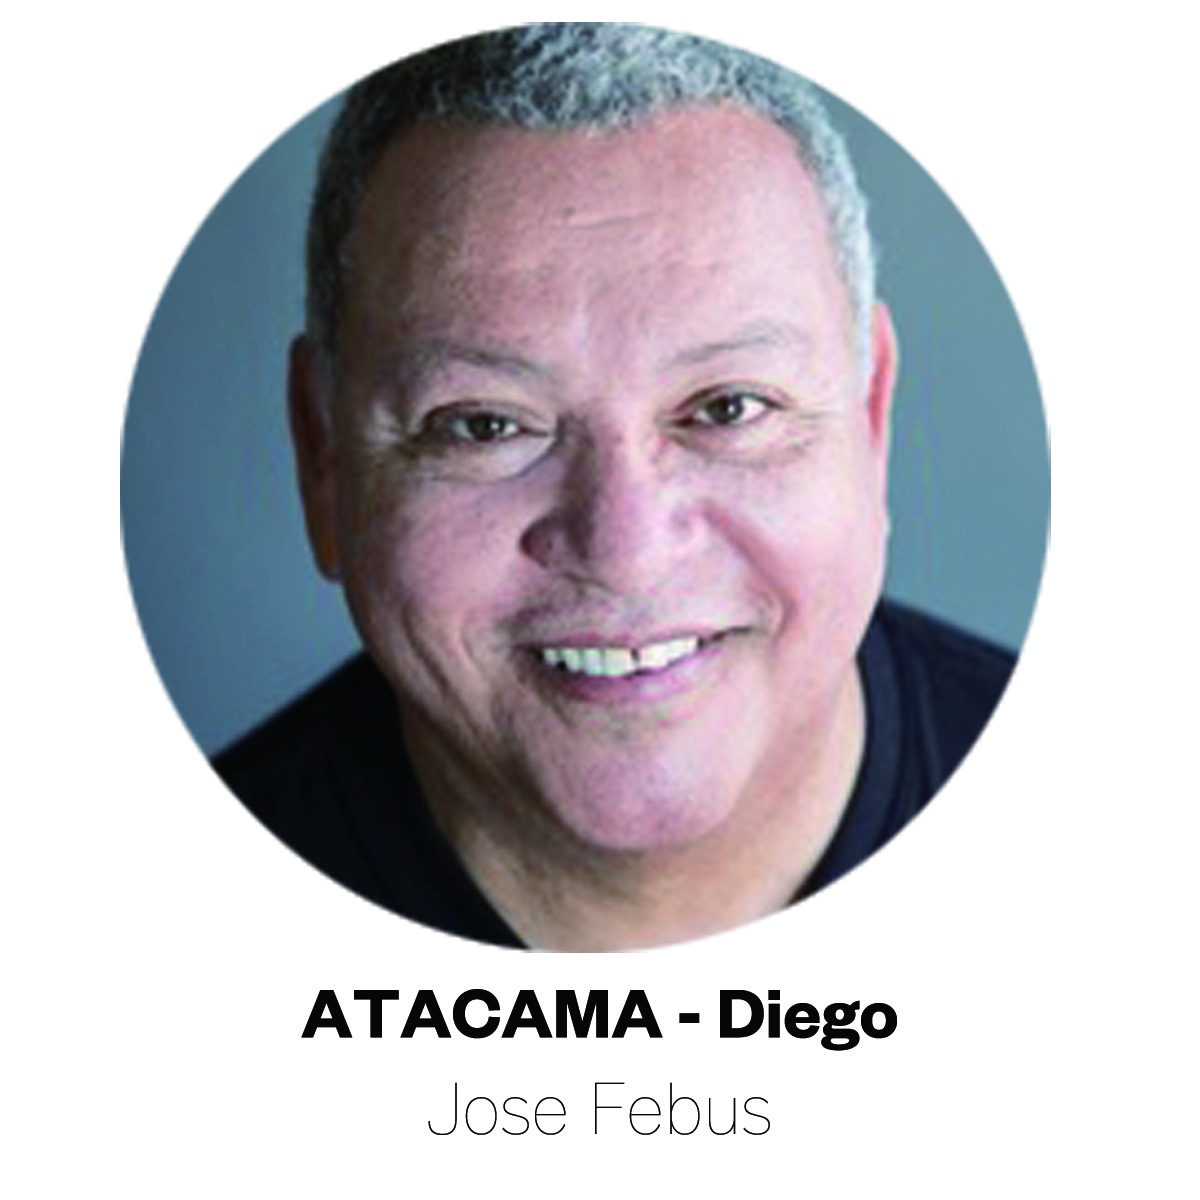 Jose Febus headshot - playing the role of Diego